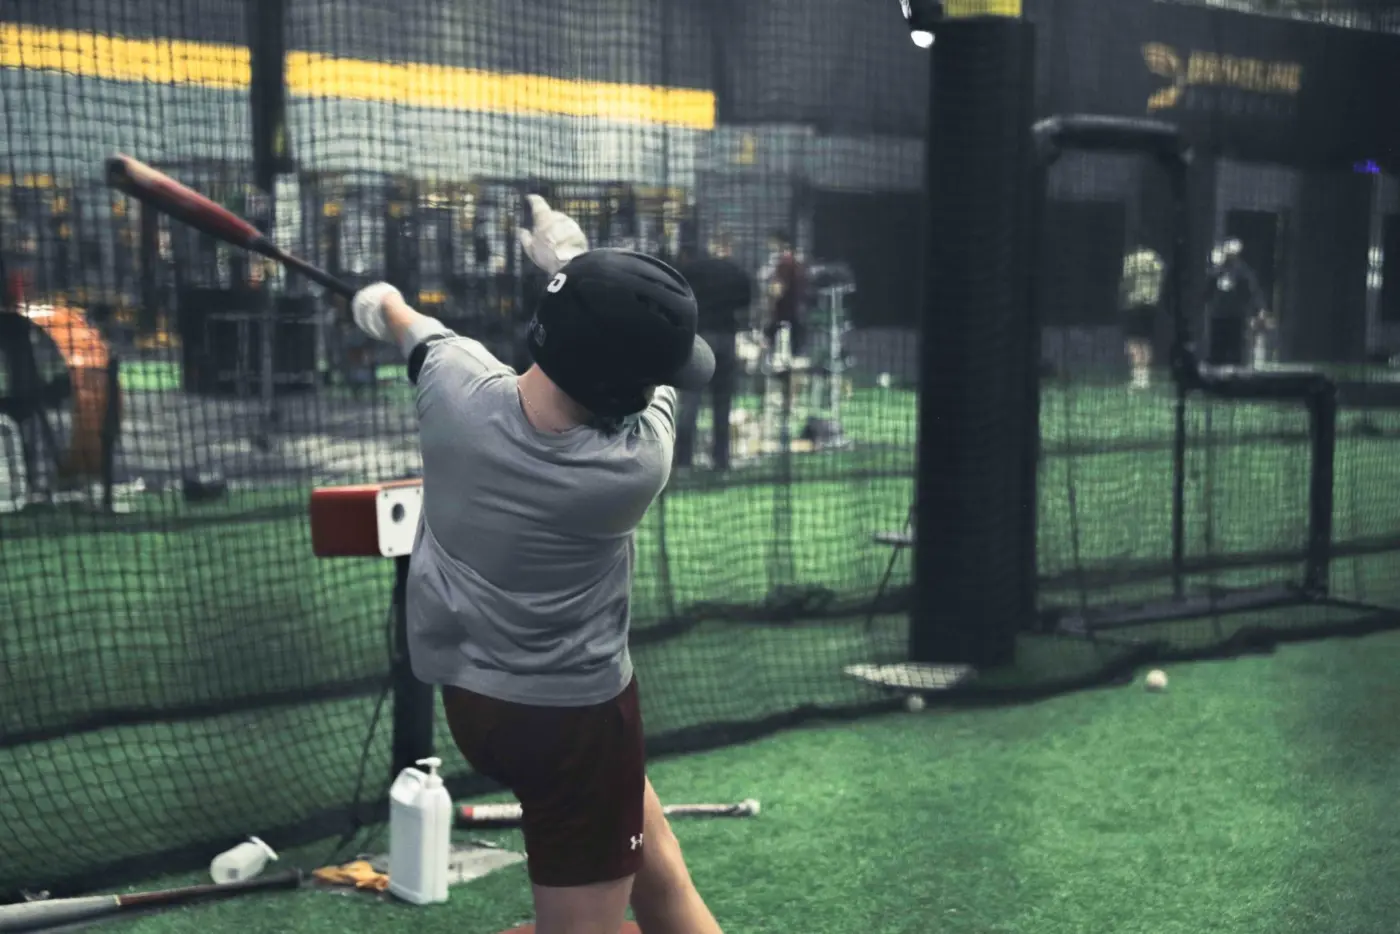 How to Increase Your Bat Speed - Driveline Baseball